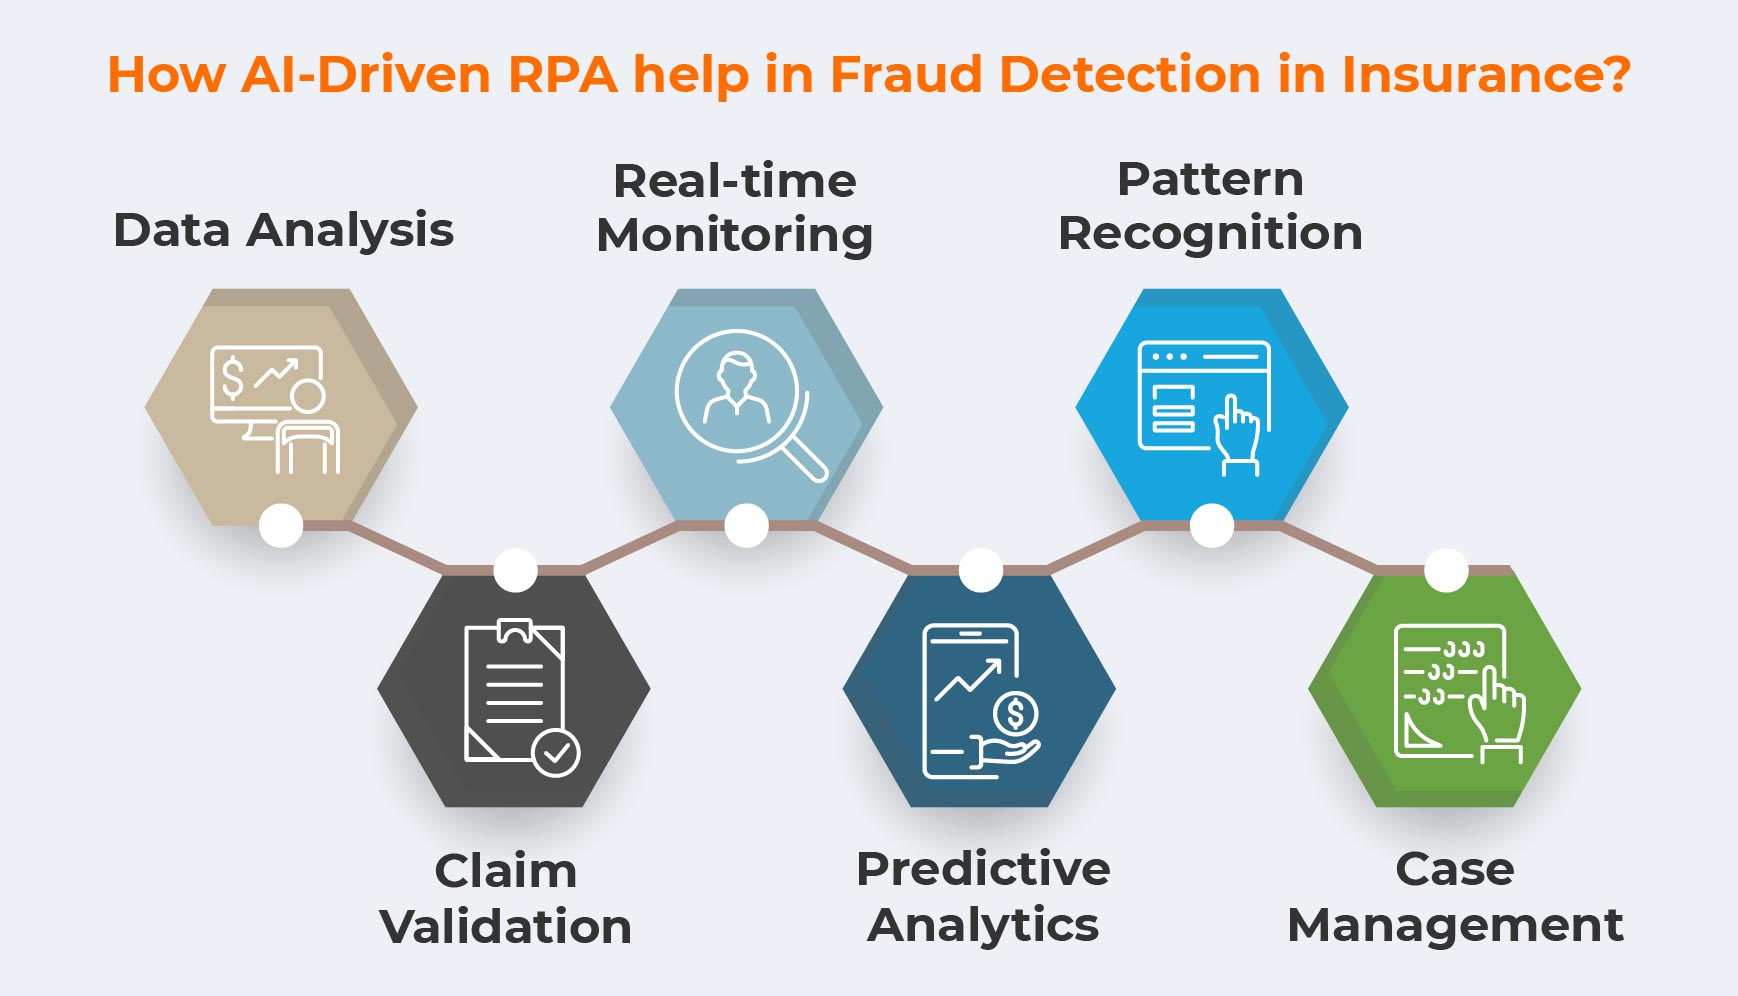 How AI-Driven RPA help in Fraud Detection in Insurance?